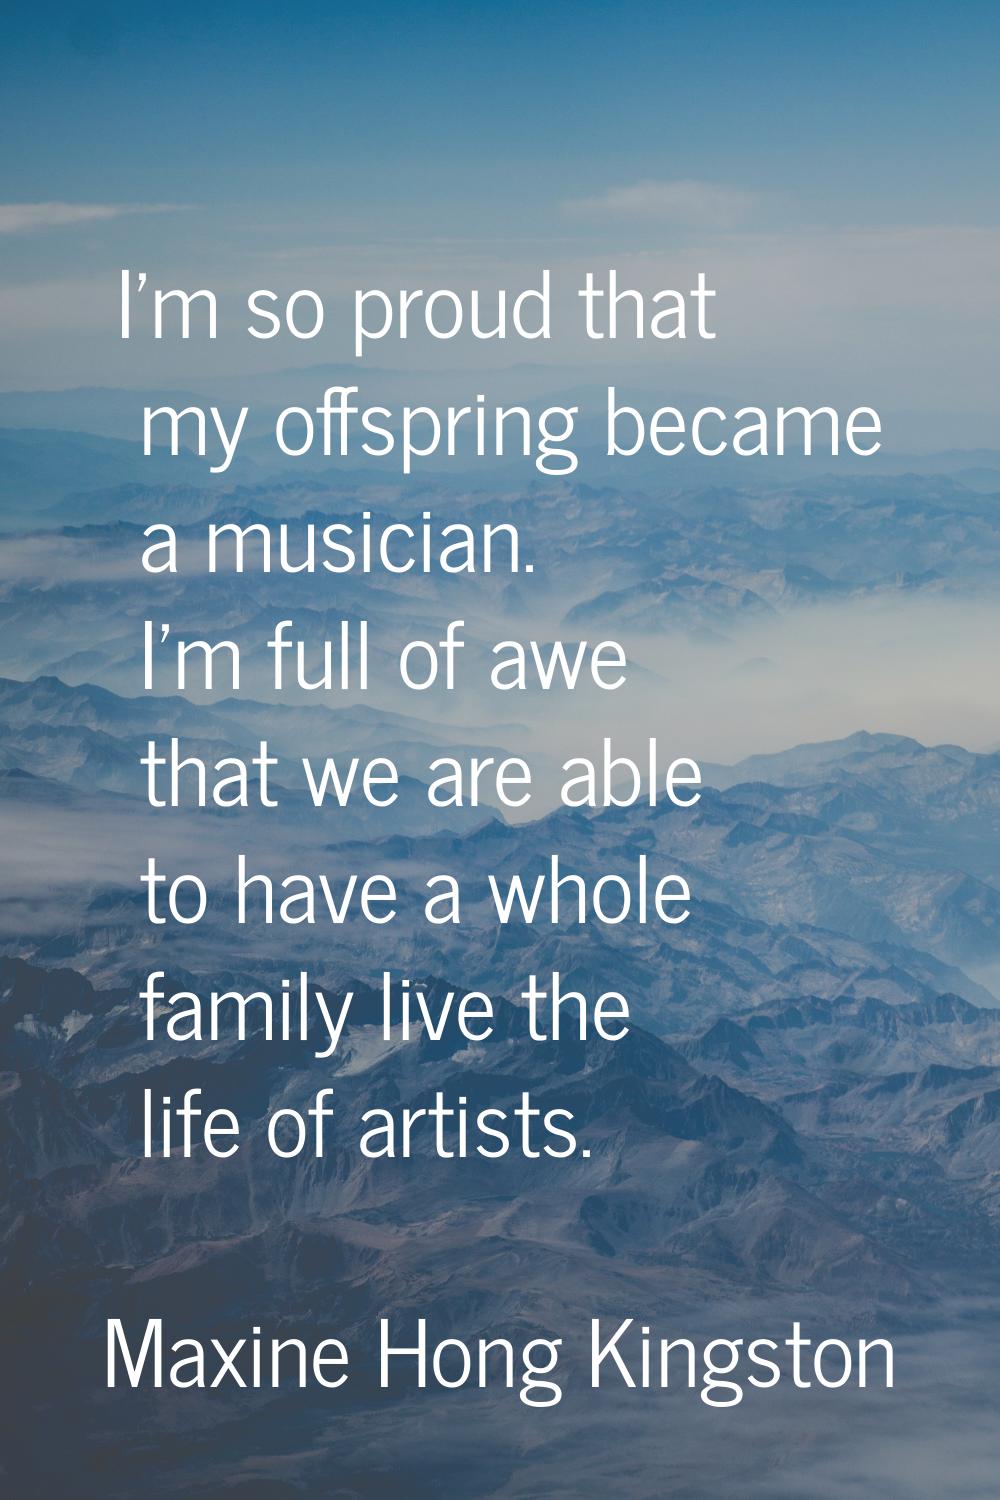 I'm so proud that my offspring became a musician. I'm full of awe that we are able to have a whole 